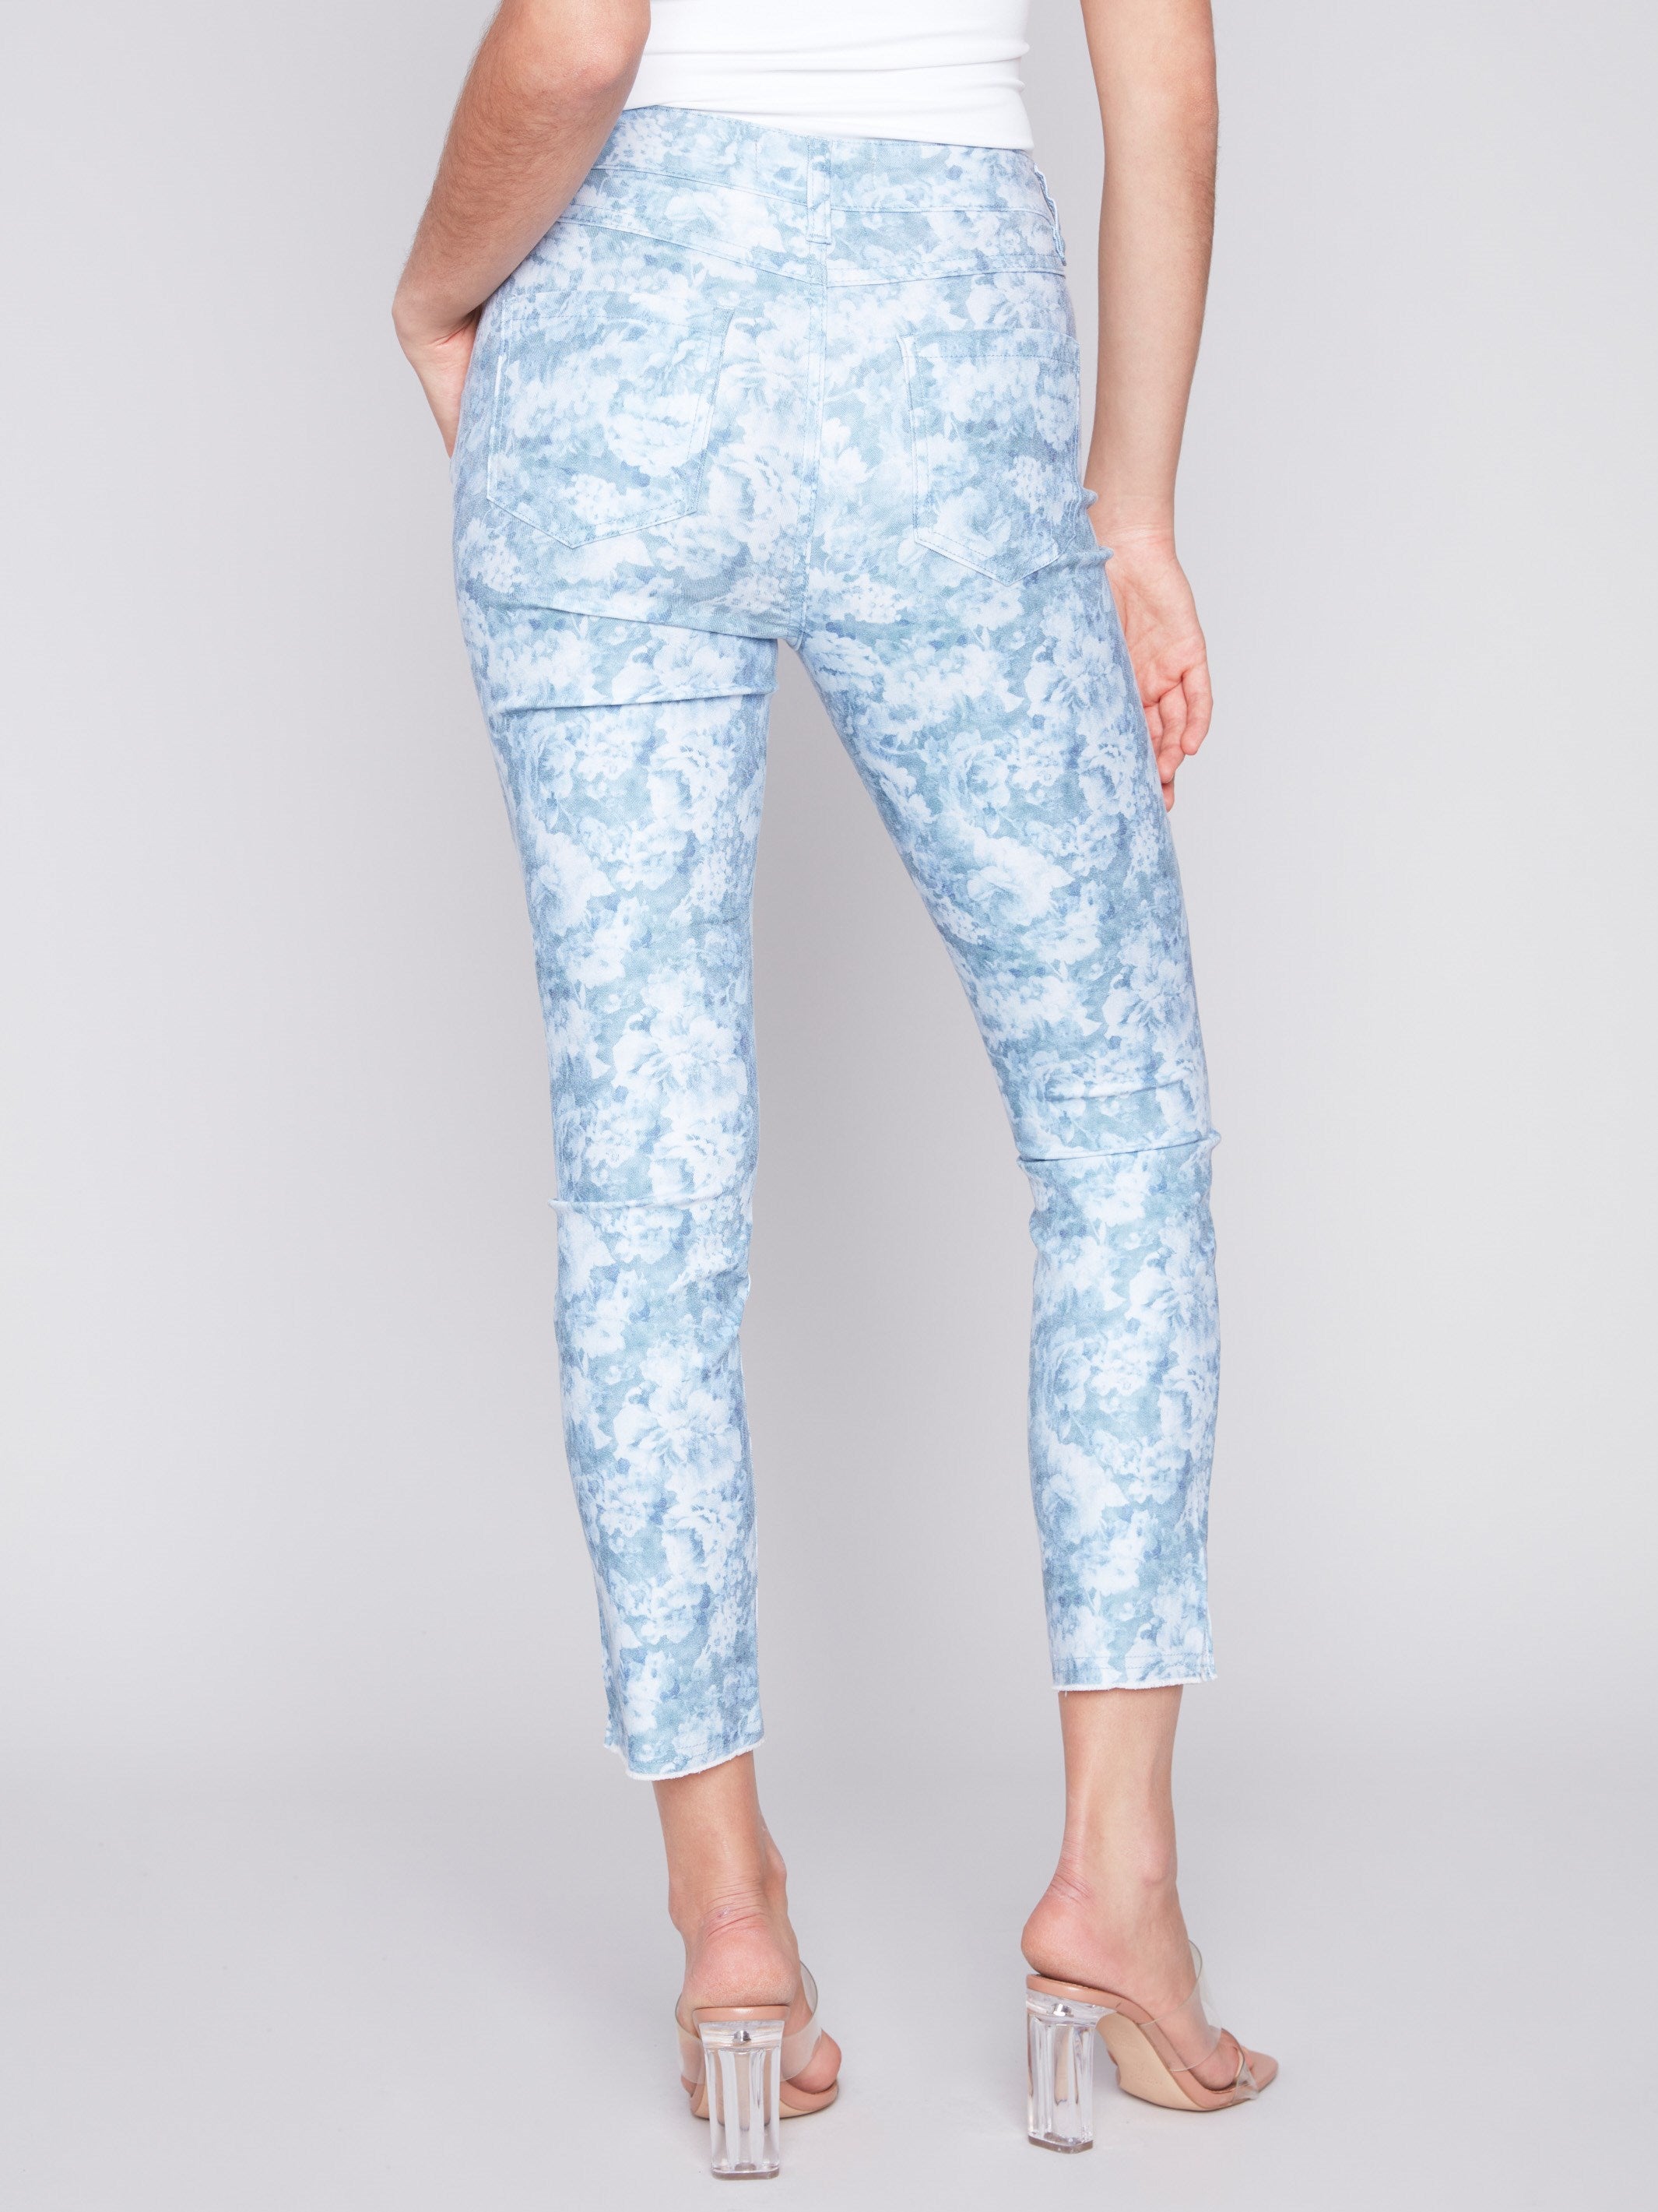 Printed Twill Pants with Hem Slit - Blue Rose - Charlie B Collection Canada - Image 3